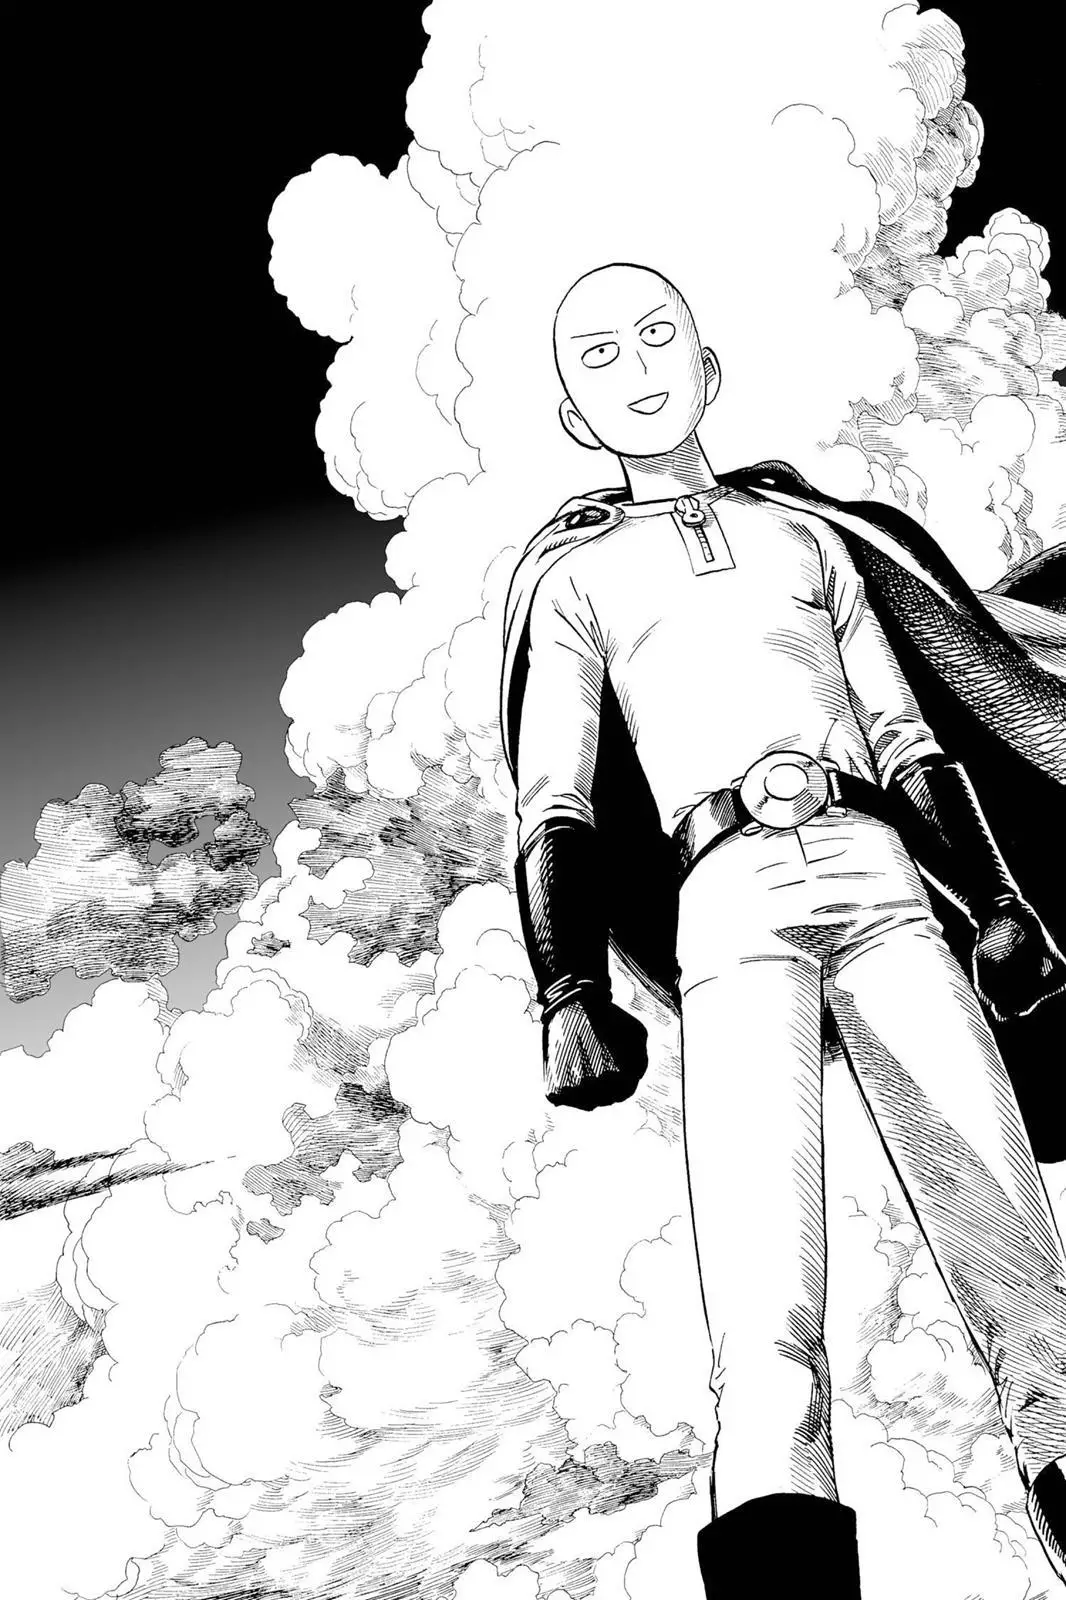 One Punch Man Chapter 20.5, READ One Punch Man Chapter 20.5 ONLINE, lost in the cloud genre,lost in the cloud gif,lost in the cloud girl,lost in the cloud goods,lost in the cloud goodreads,lost in the cloud,lost ark cloud gaming,lost odyssey cloud gaming,lost in the cloud fanart,lost in the cloud fanfic,lost in the cloud fandom,lost in the cloud first kiss,lost in the cloud font,lost in the cloud ending,lost in the cloud episode 97,lost in the cloud edit,lost in the cloud explained,lost in the cloud dog,lost in the cloud discord server,lost in the cloud desktop wallpaper,lost in the cloud drawing,can't find my cloud on network,lost in the cloud characters,lost in the cloud chapter 93 release date,lost in the cloud birthday,lost in the cloud birthday art,lost in the cloud background,lost in the cloud banner,lost in the clouds meaning,what is the black cloud in lost,lost in the cloud ao3,lost in the cloud anime,lost in the cloud art,lost in the cloud author twitter,lost in the cloud author instagram,lost in the cloud artist,lost in the cloud acrylic stand,lost in the cloud artist twitter,lost in the cloud art style,lost in the cloud analysis